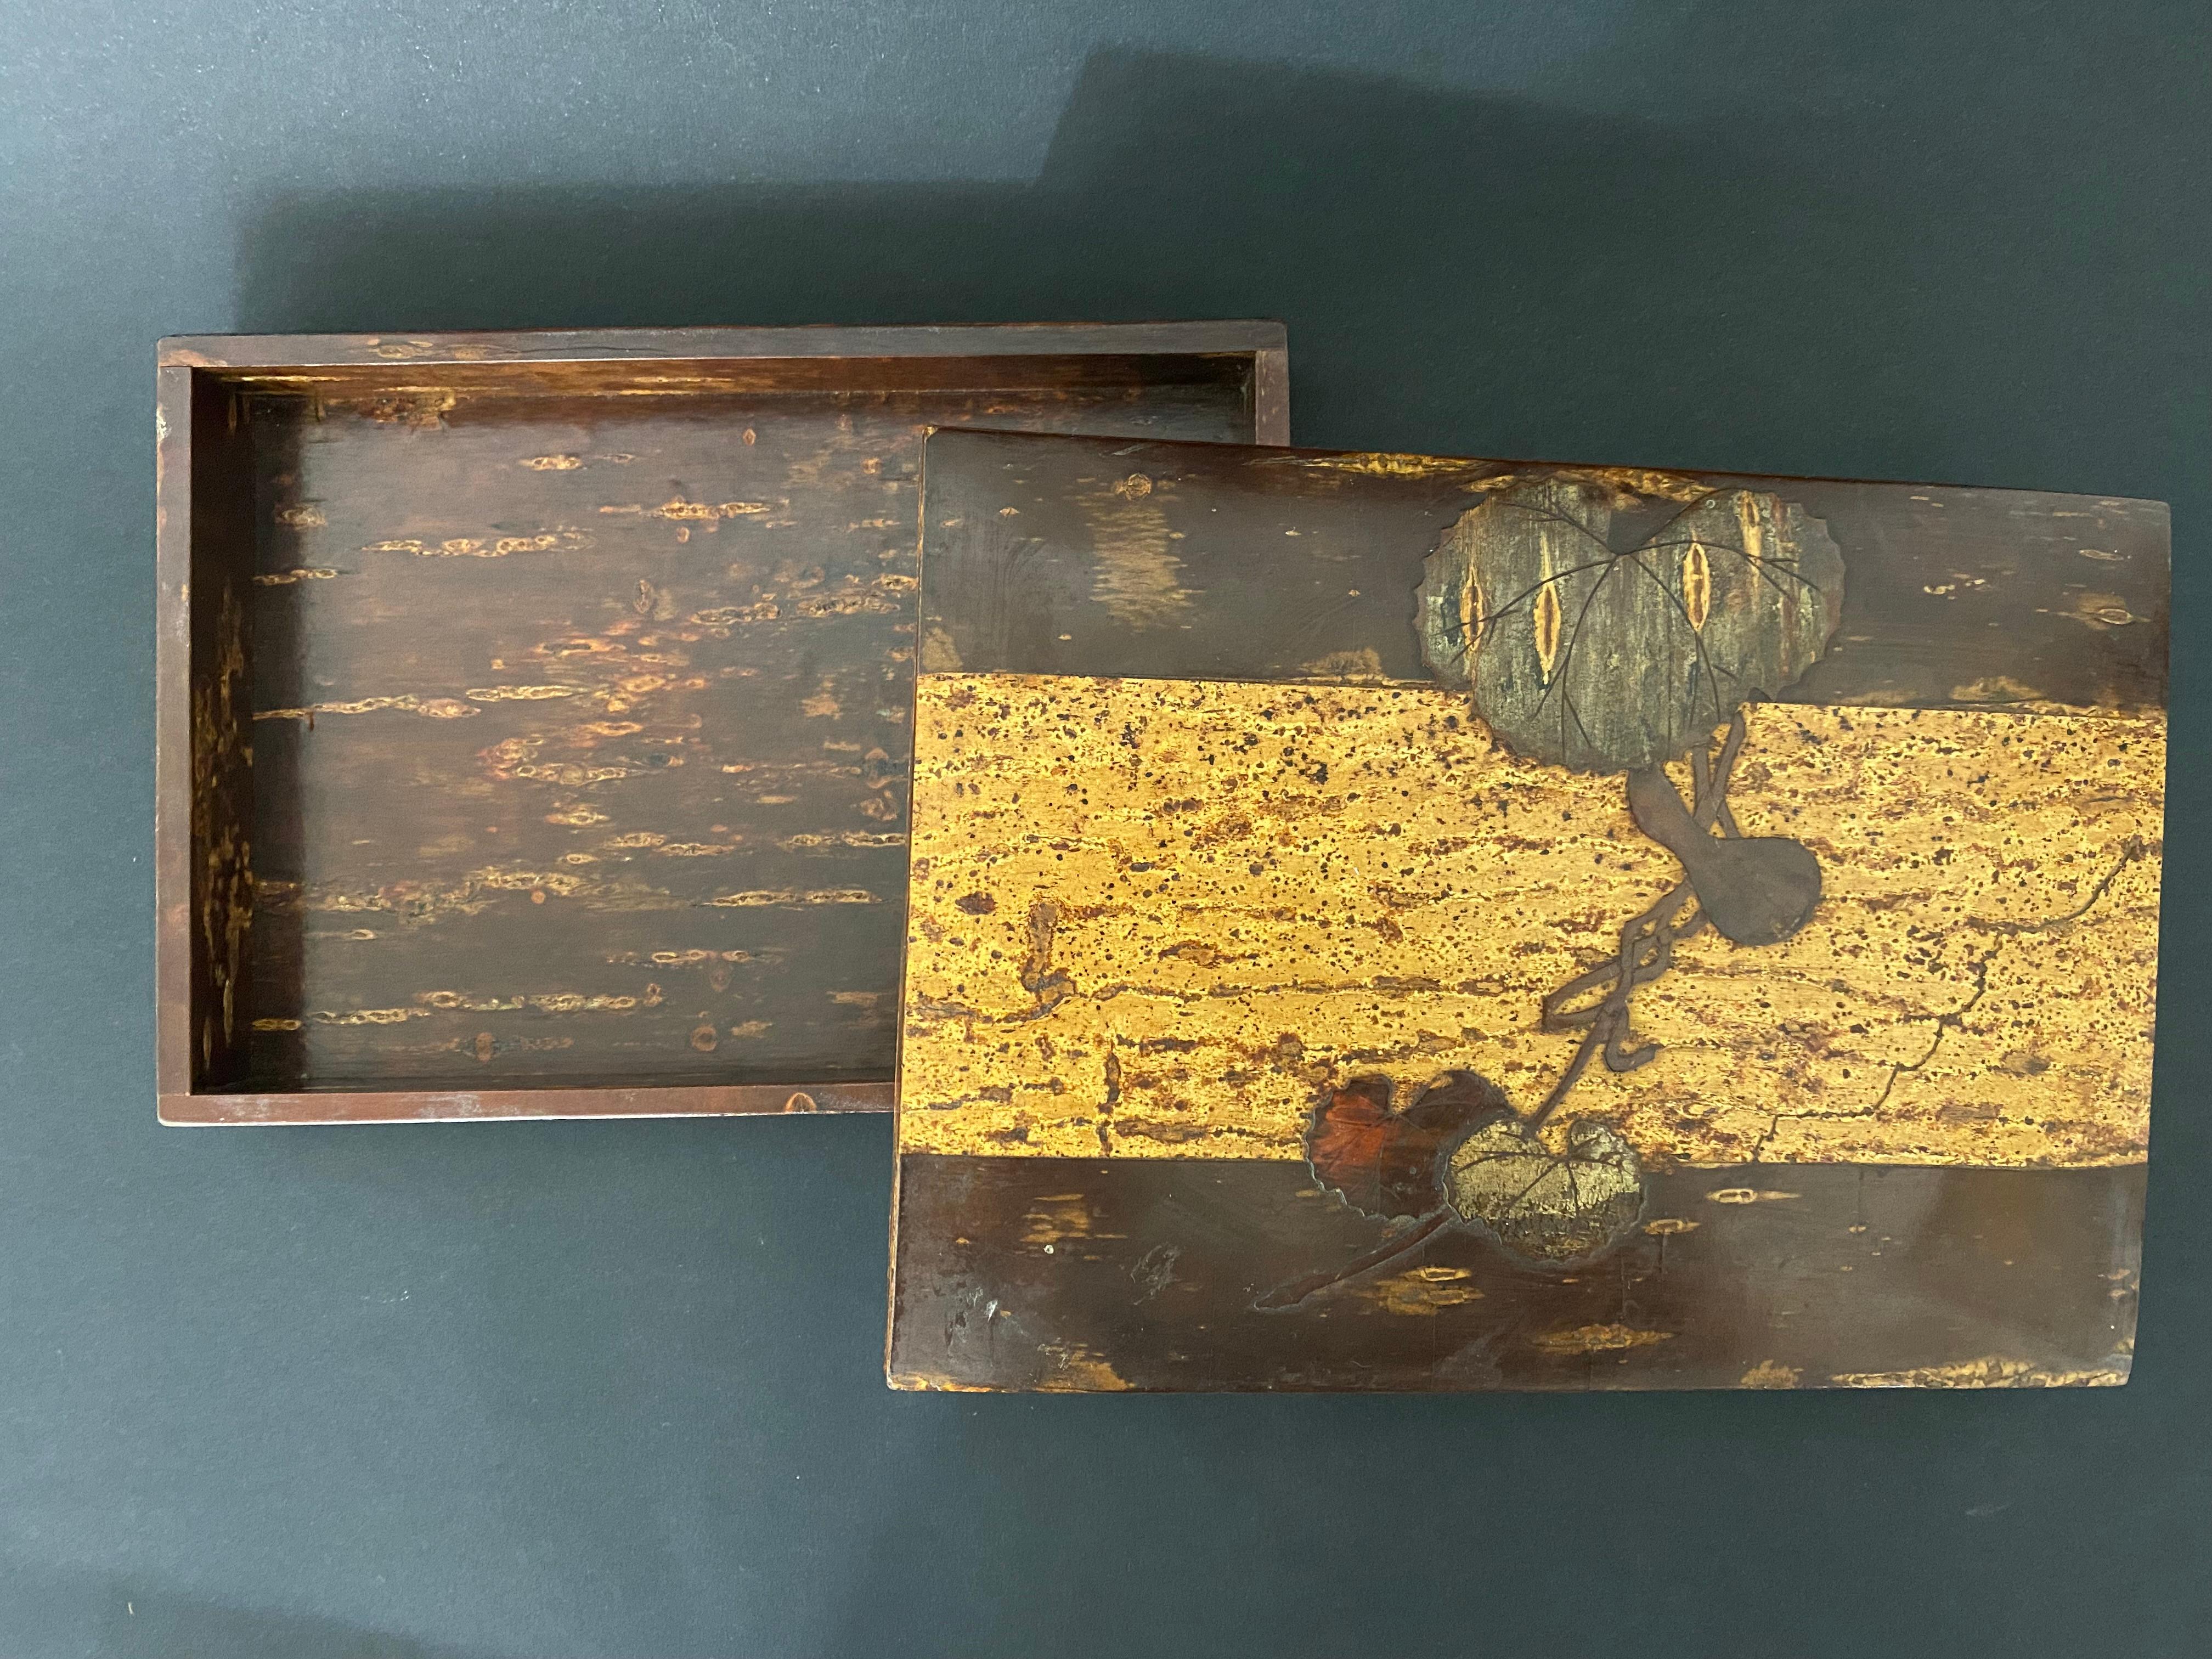 Charming Japanese box from the early 20th century. The wood is old and nicely inlaid on the lid. The lid is inlaid with different pieces of wood forming a branch of coloquint. The use of multiple species of wood allows the decoration to stand out.